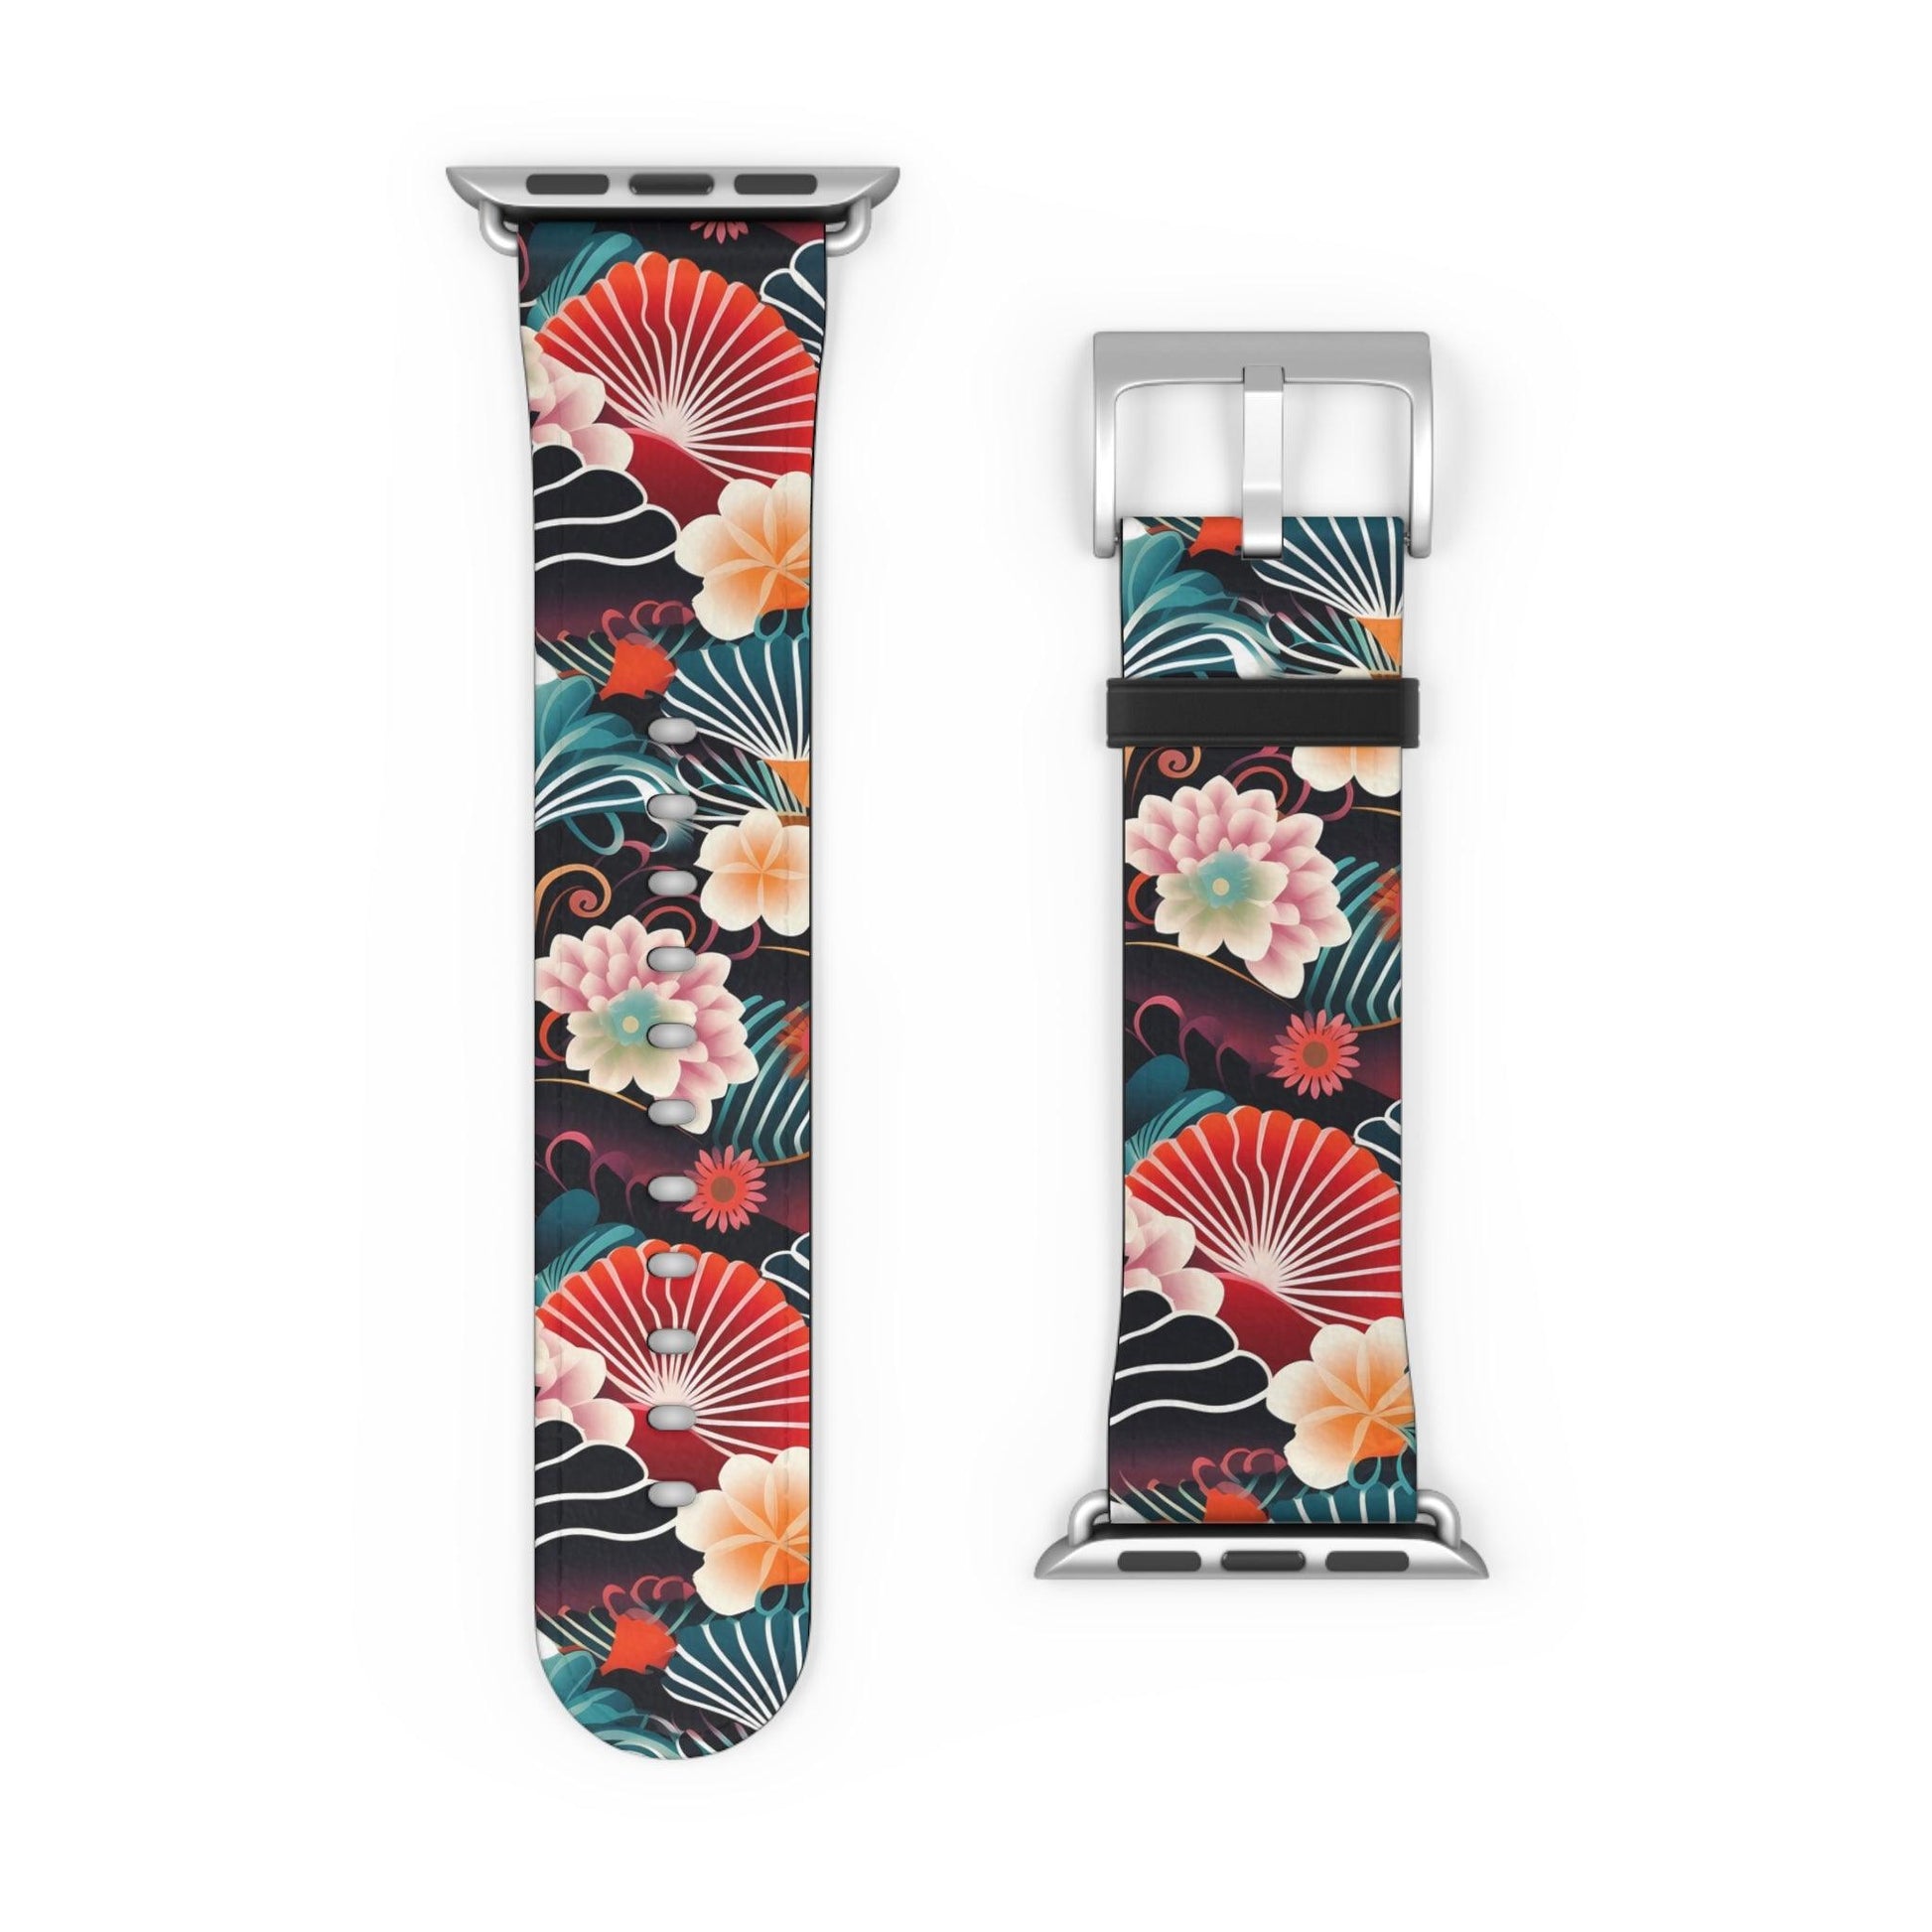 Japanese Origami Watch Band - The Global Wanderer